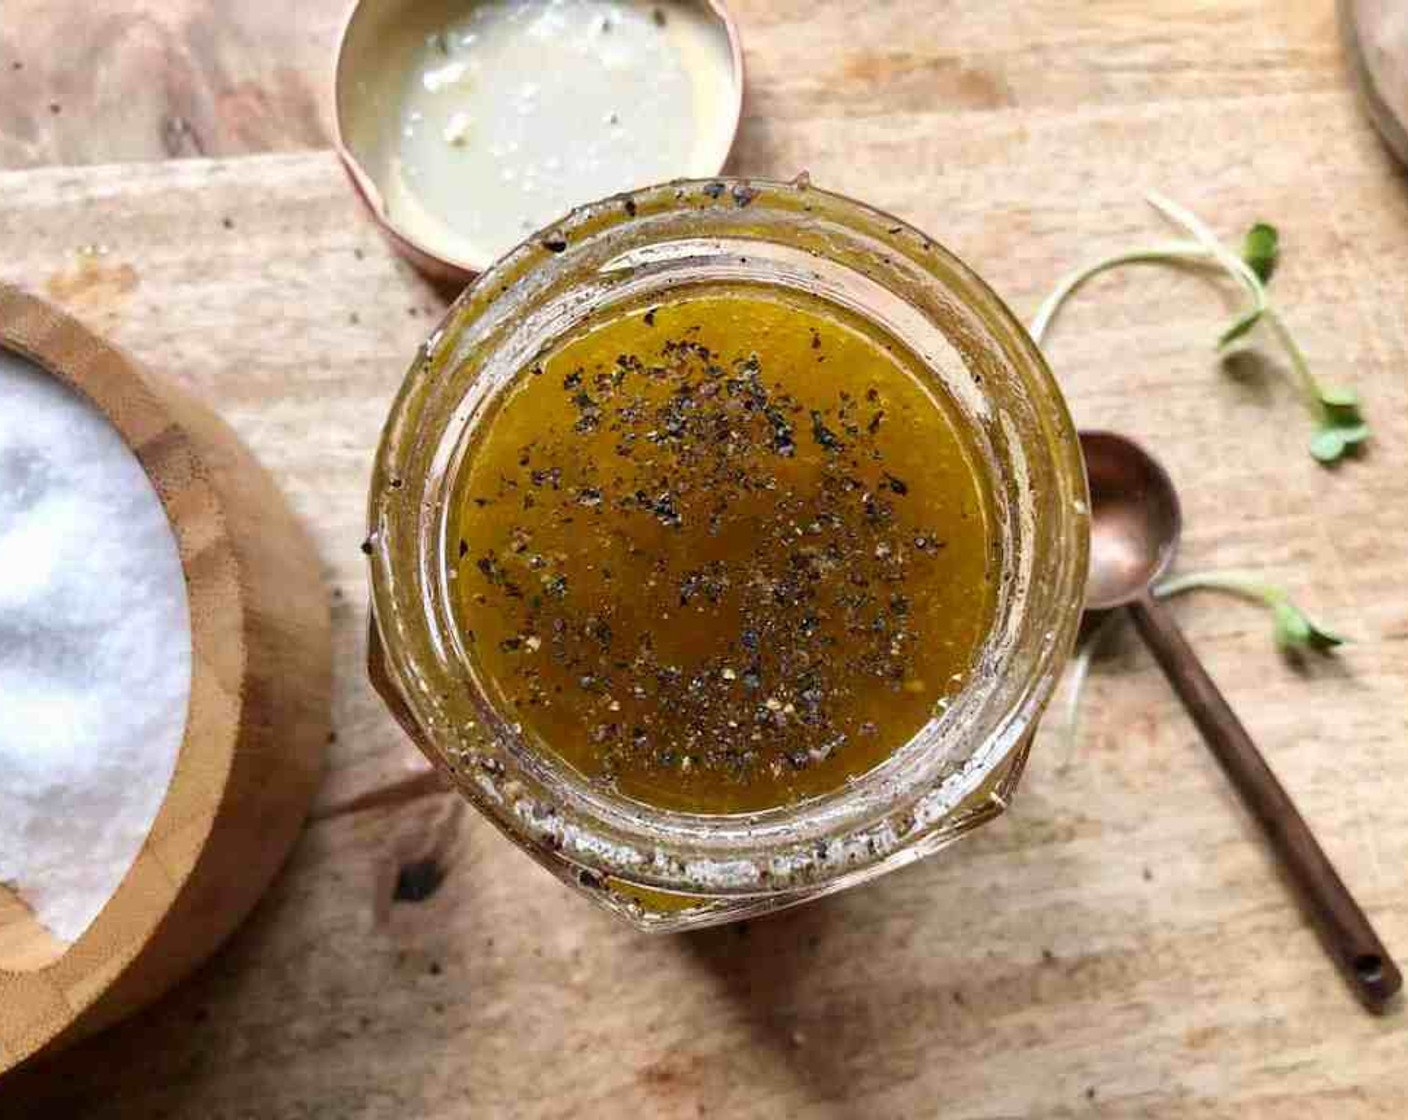 step 1 For the vinaigrette, in a screw-top jar combine Extra-Virgin Olive Oil (2/3 cup), Sherry Vinegar (1/3 cup), and Granulated Sugar (1 tsp). Cover and shake to combine. Season to taste with Salt (to taste) and Freshly Ground Black Pepper (to taste). Set aside.